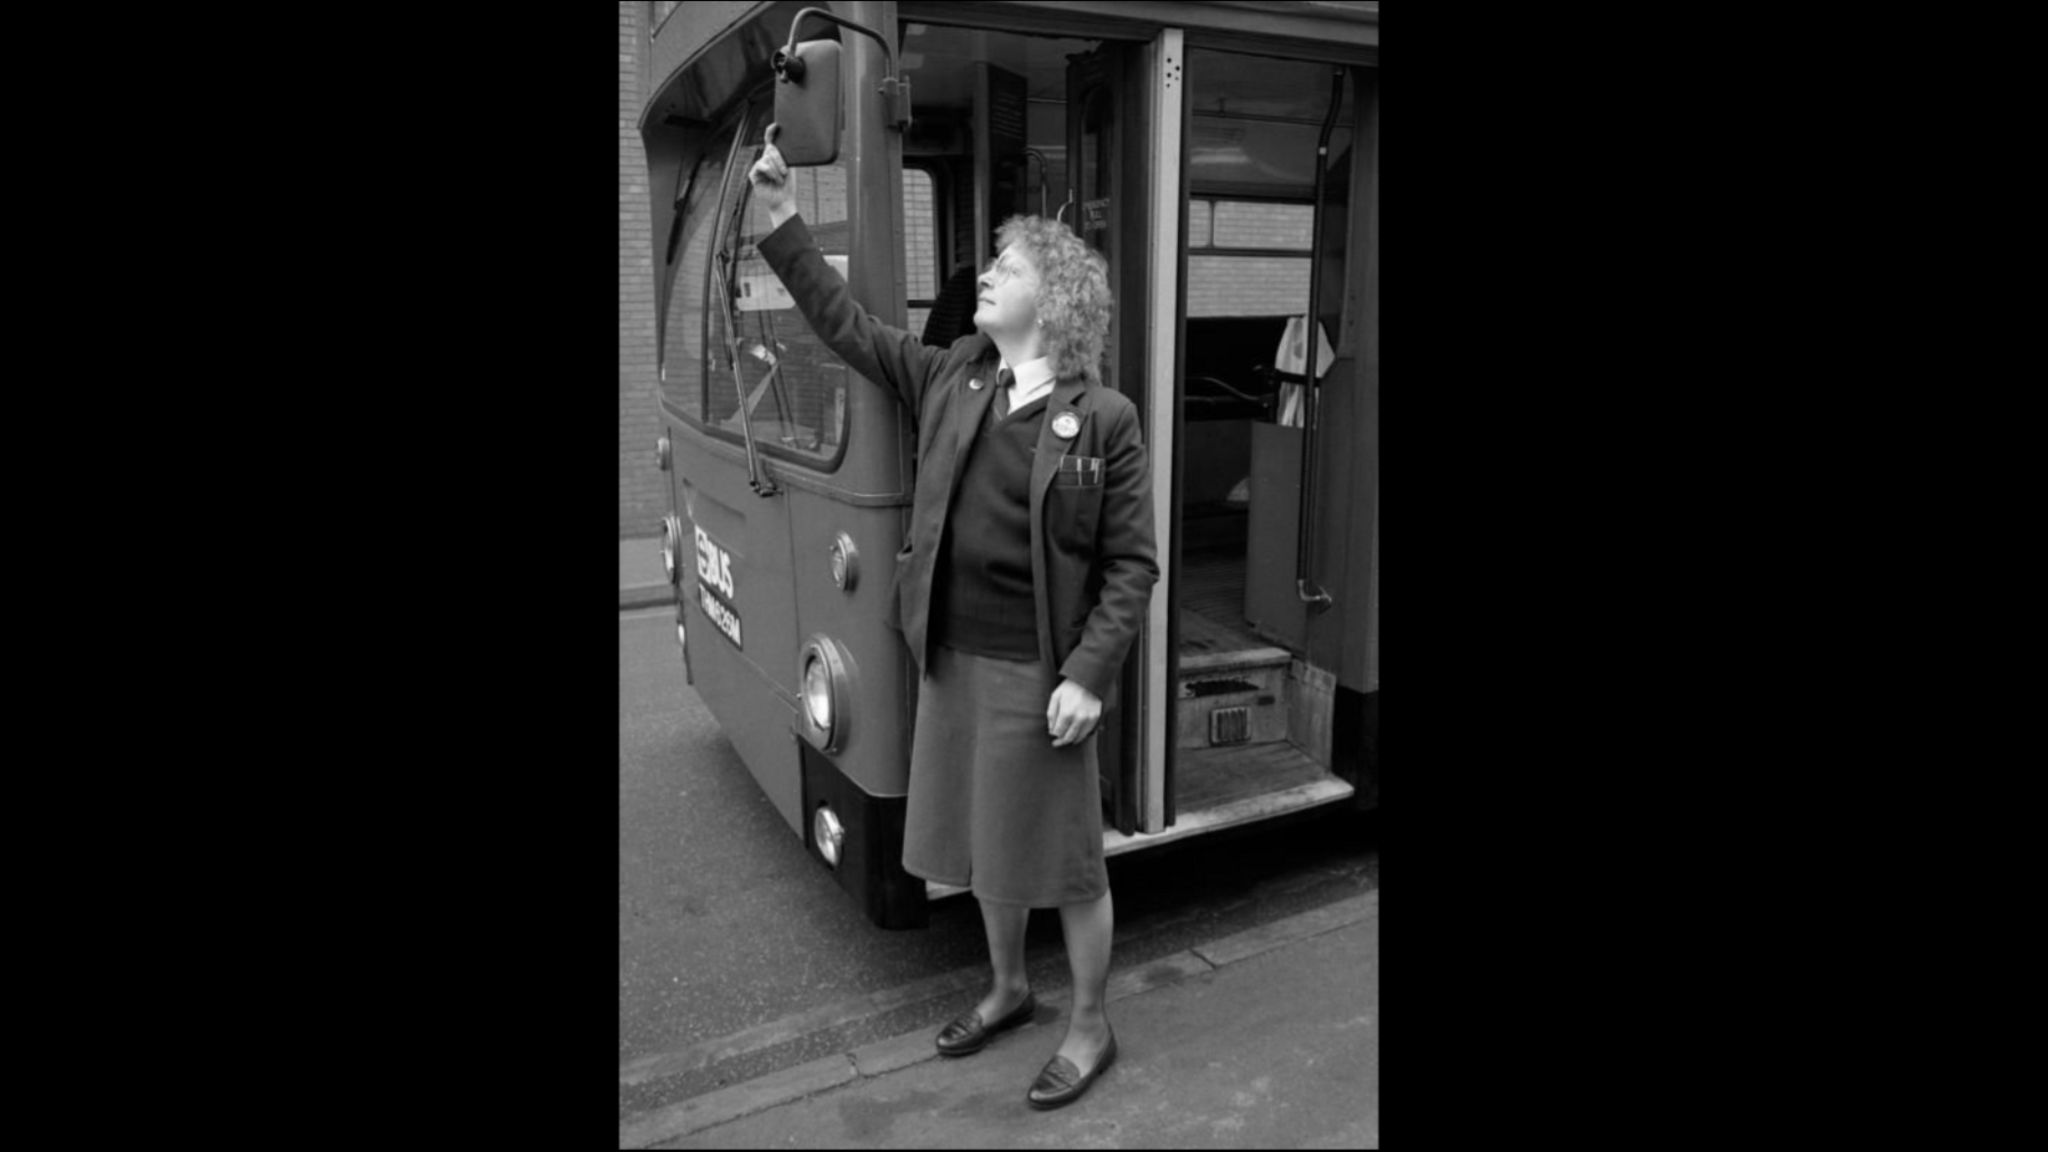 Jill checks the bus at the start of her shift